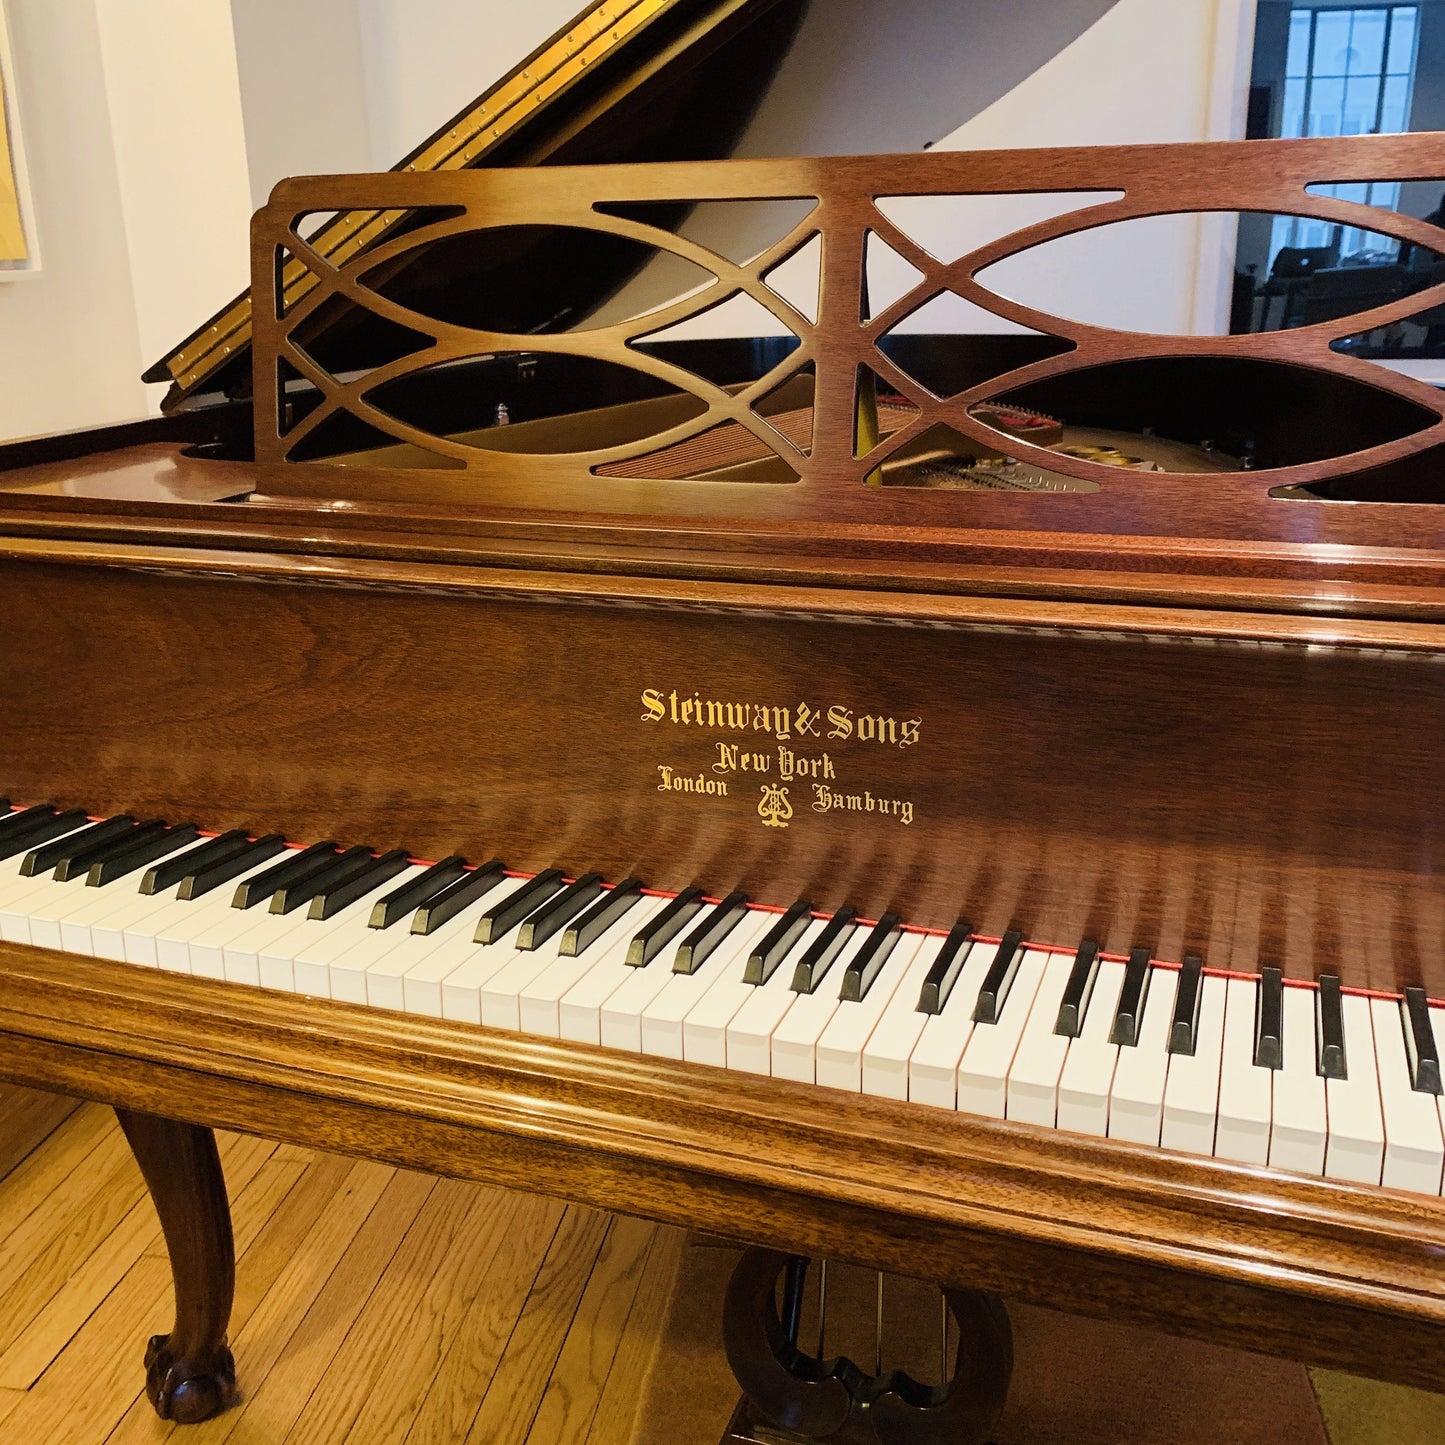 Steinway Model M Piano | Limited "Heirloom" Edition Sold at Steinway NYC Showroom in 2005